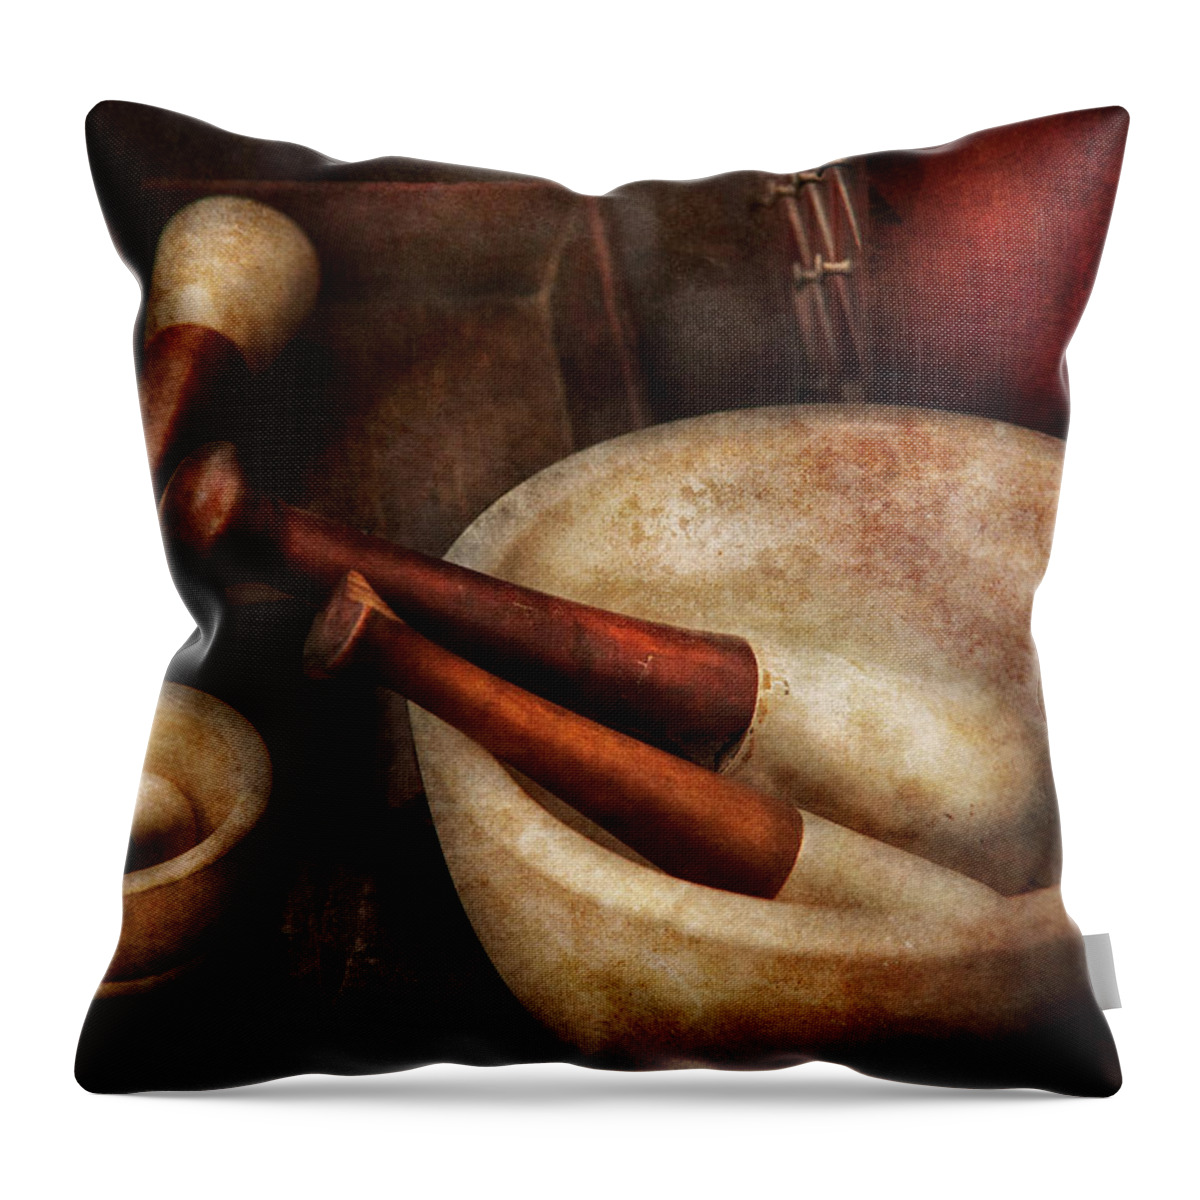 Suburbanscenes Throw Pillow featuring the photograph Pharmacy - Back to the grind by Mike Savad